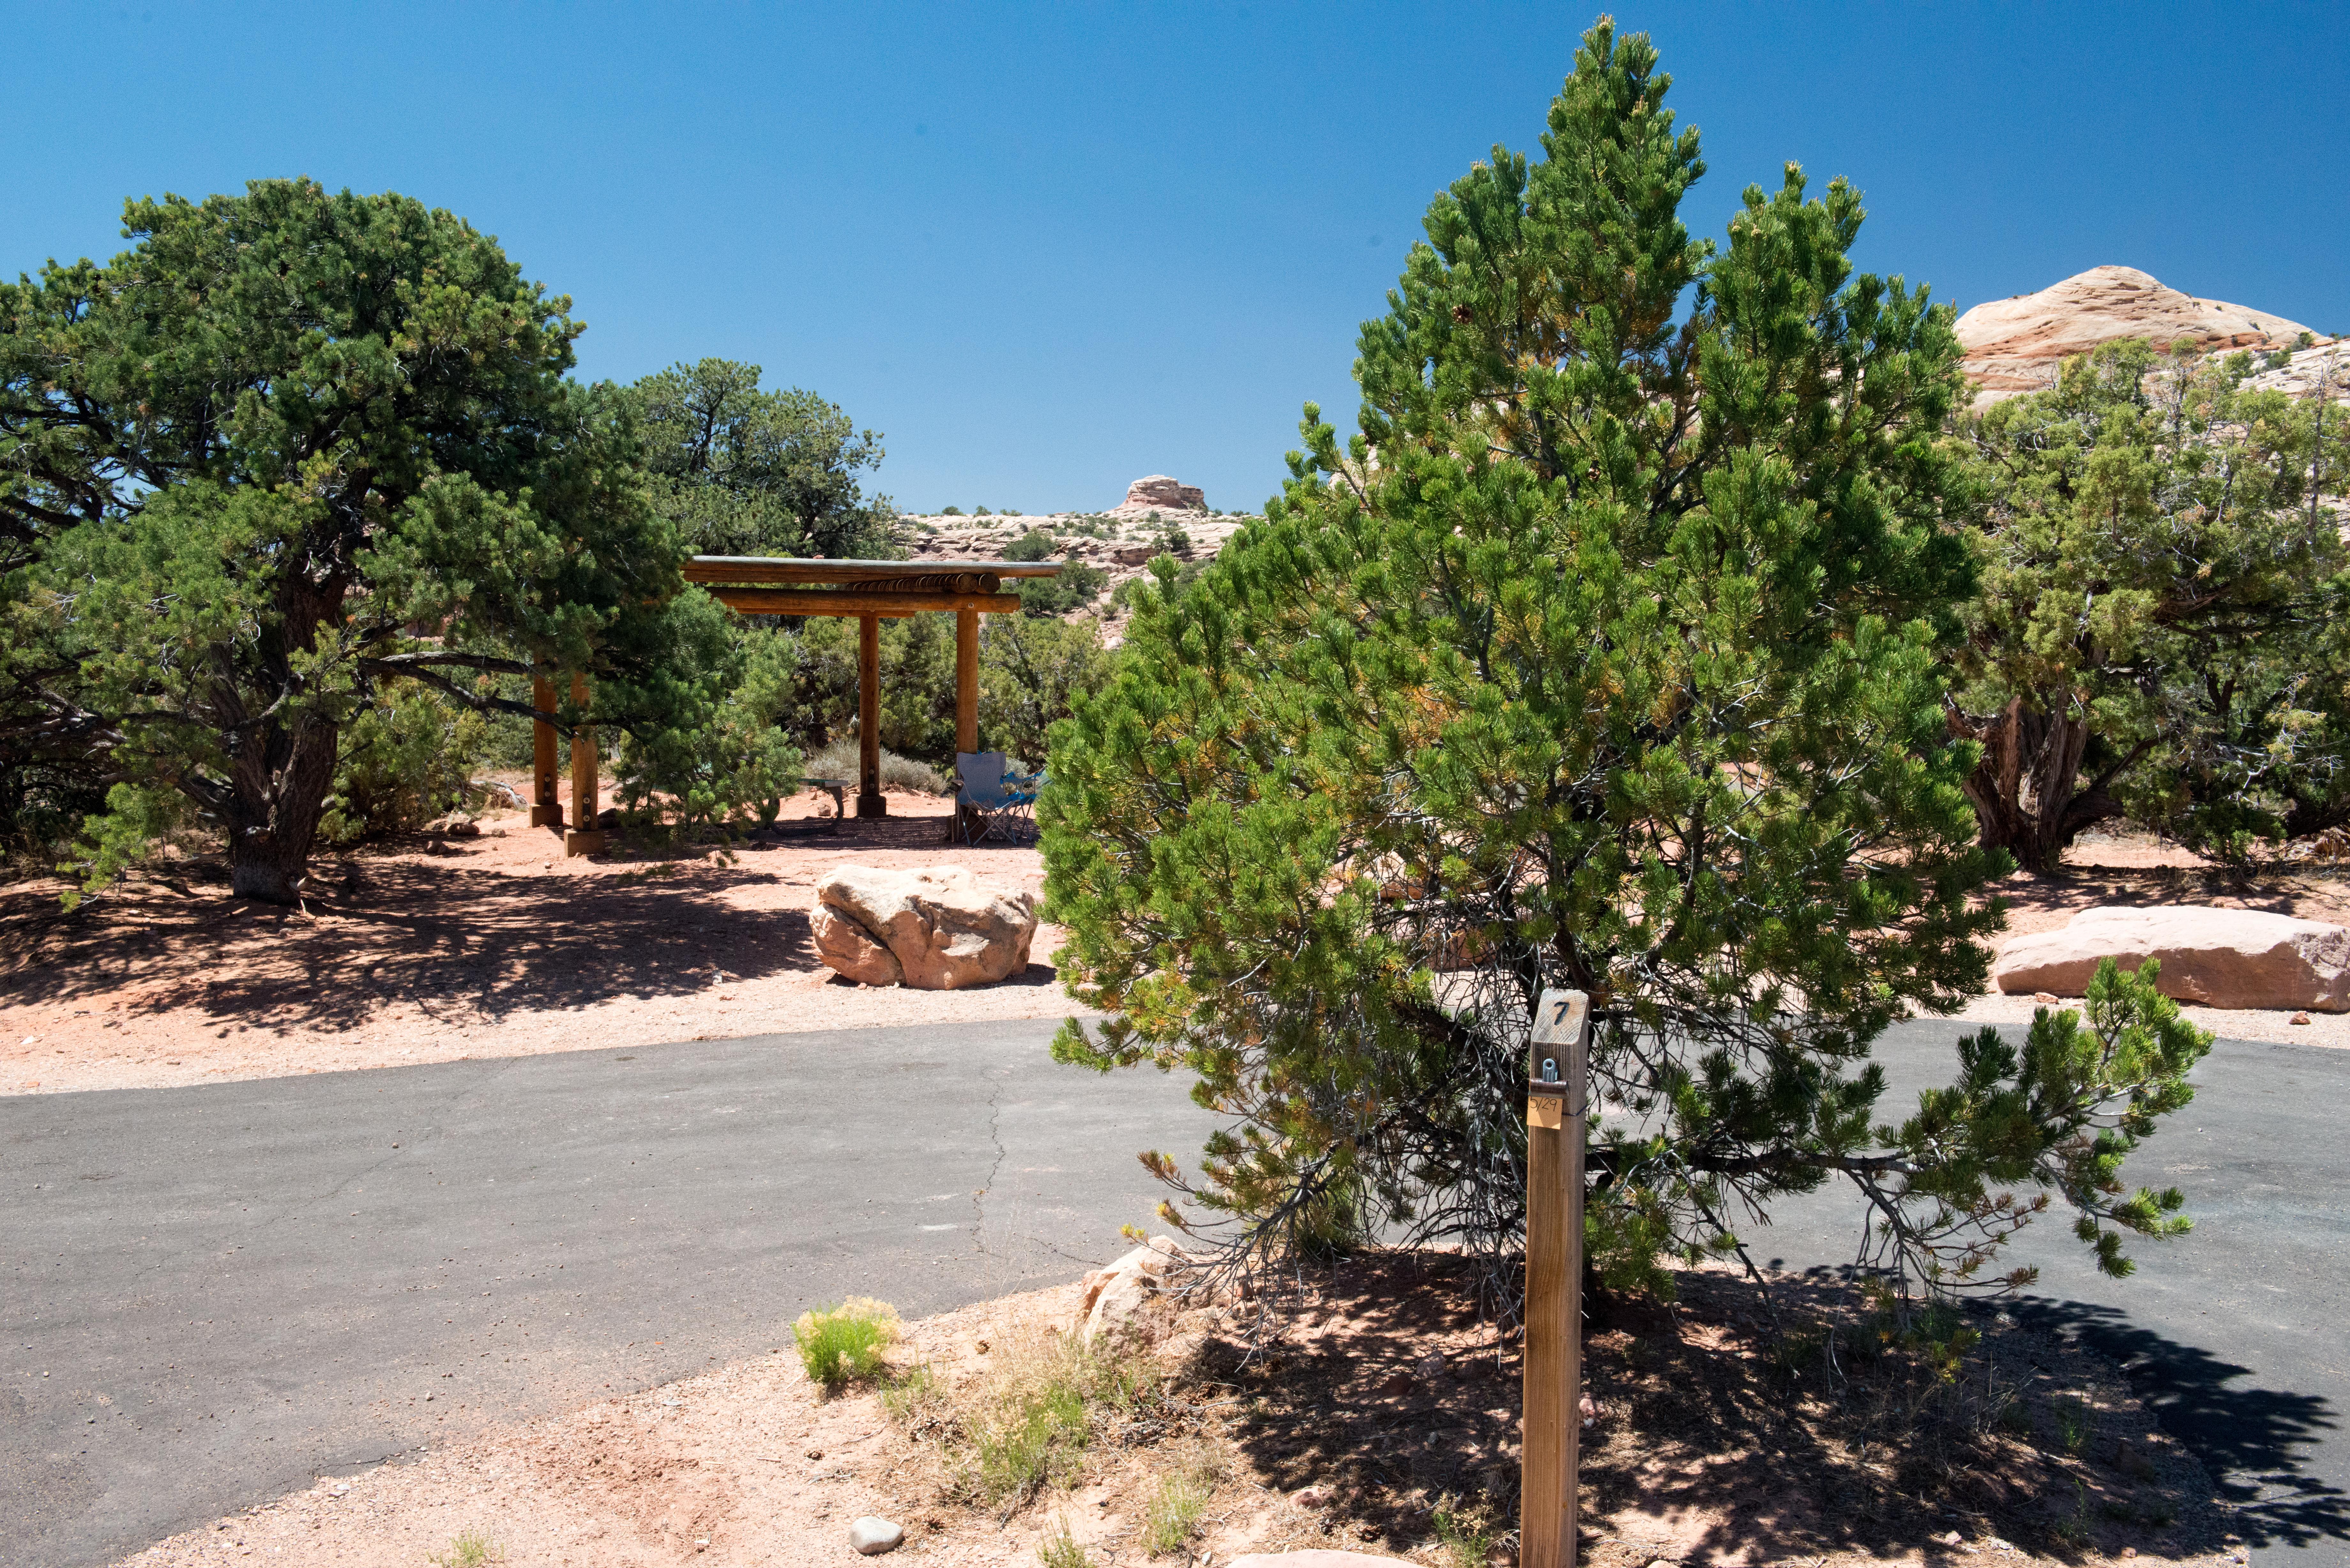 a paved parking area with a juniper tree and a shade structure in the distance